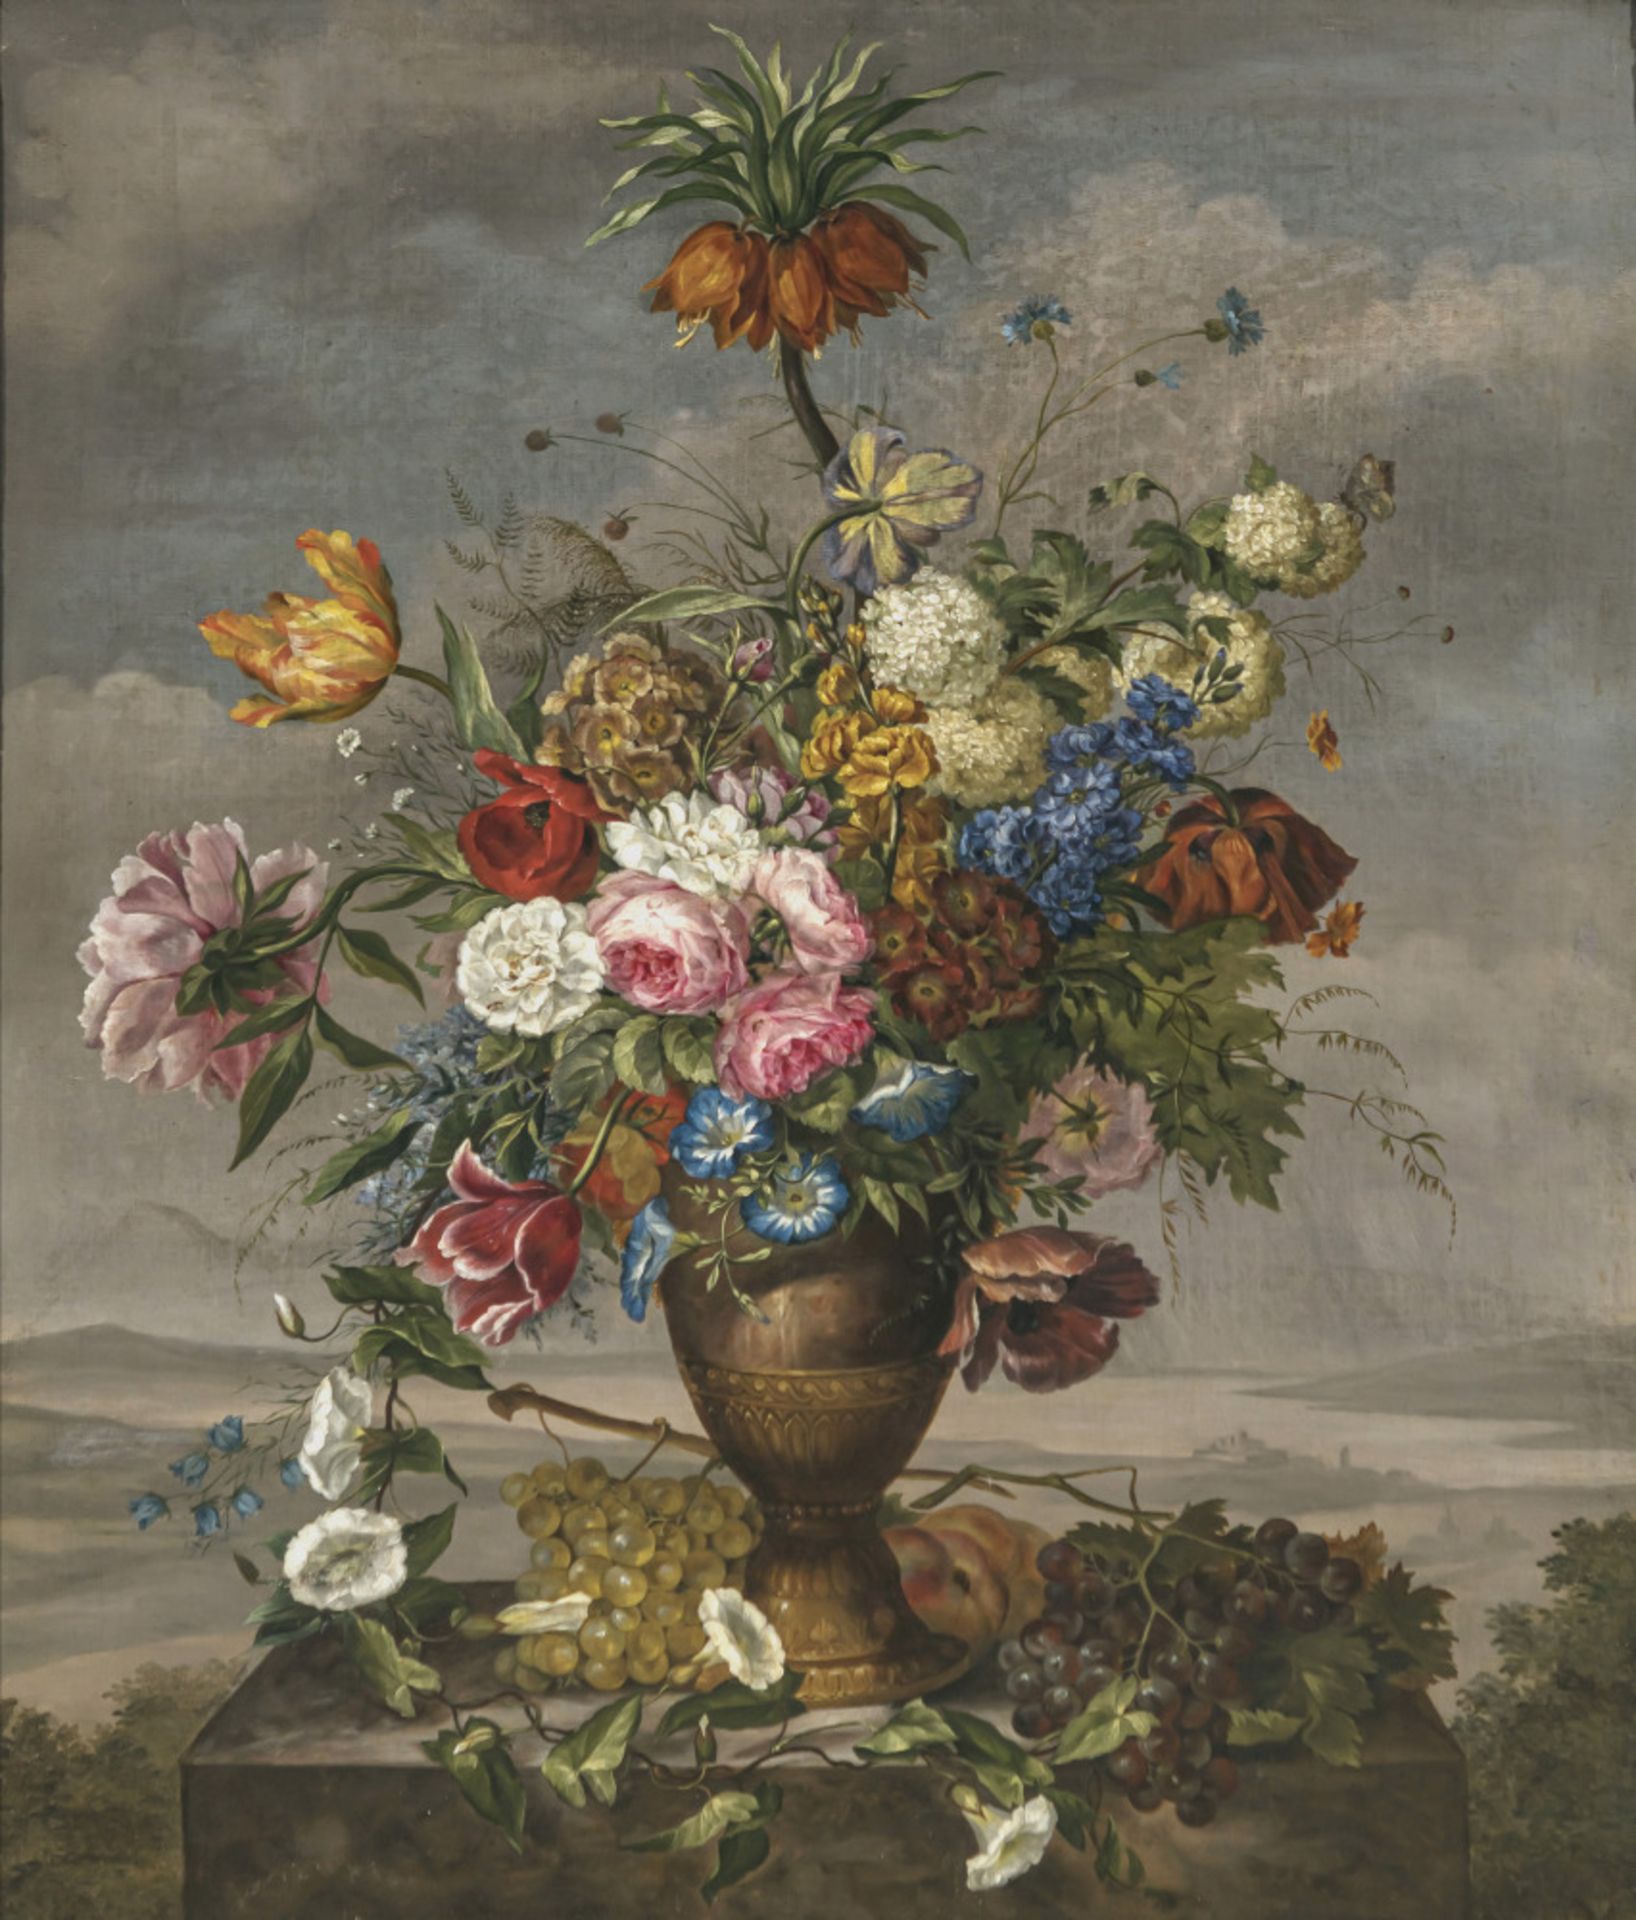 Österreich (?) 1st half of the 19th century - Still life with flowers and fruit in front of a landsc